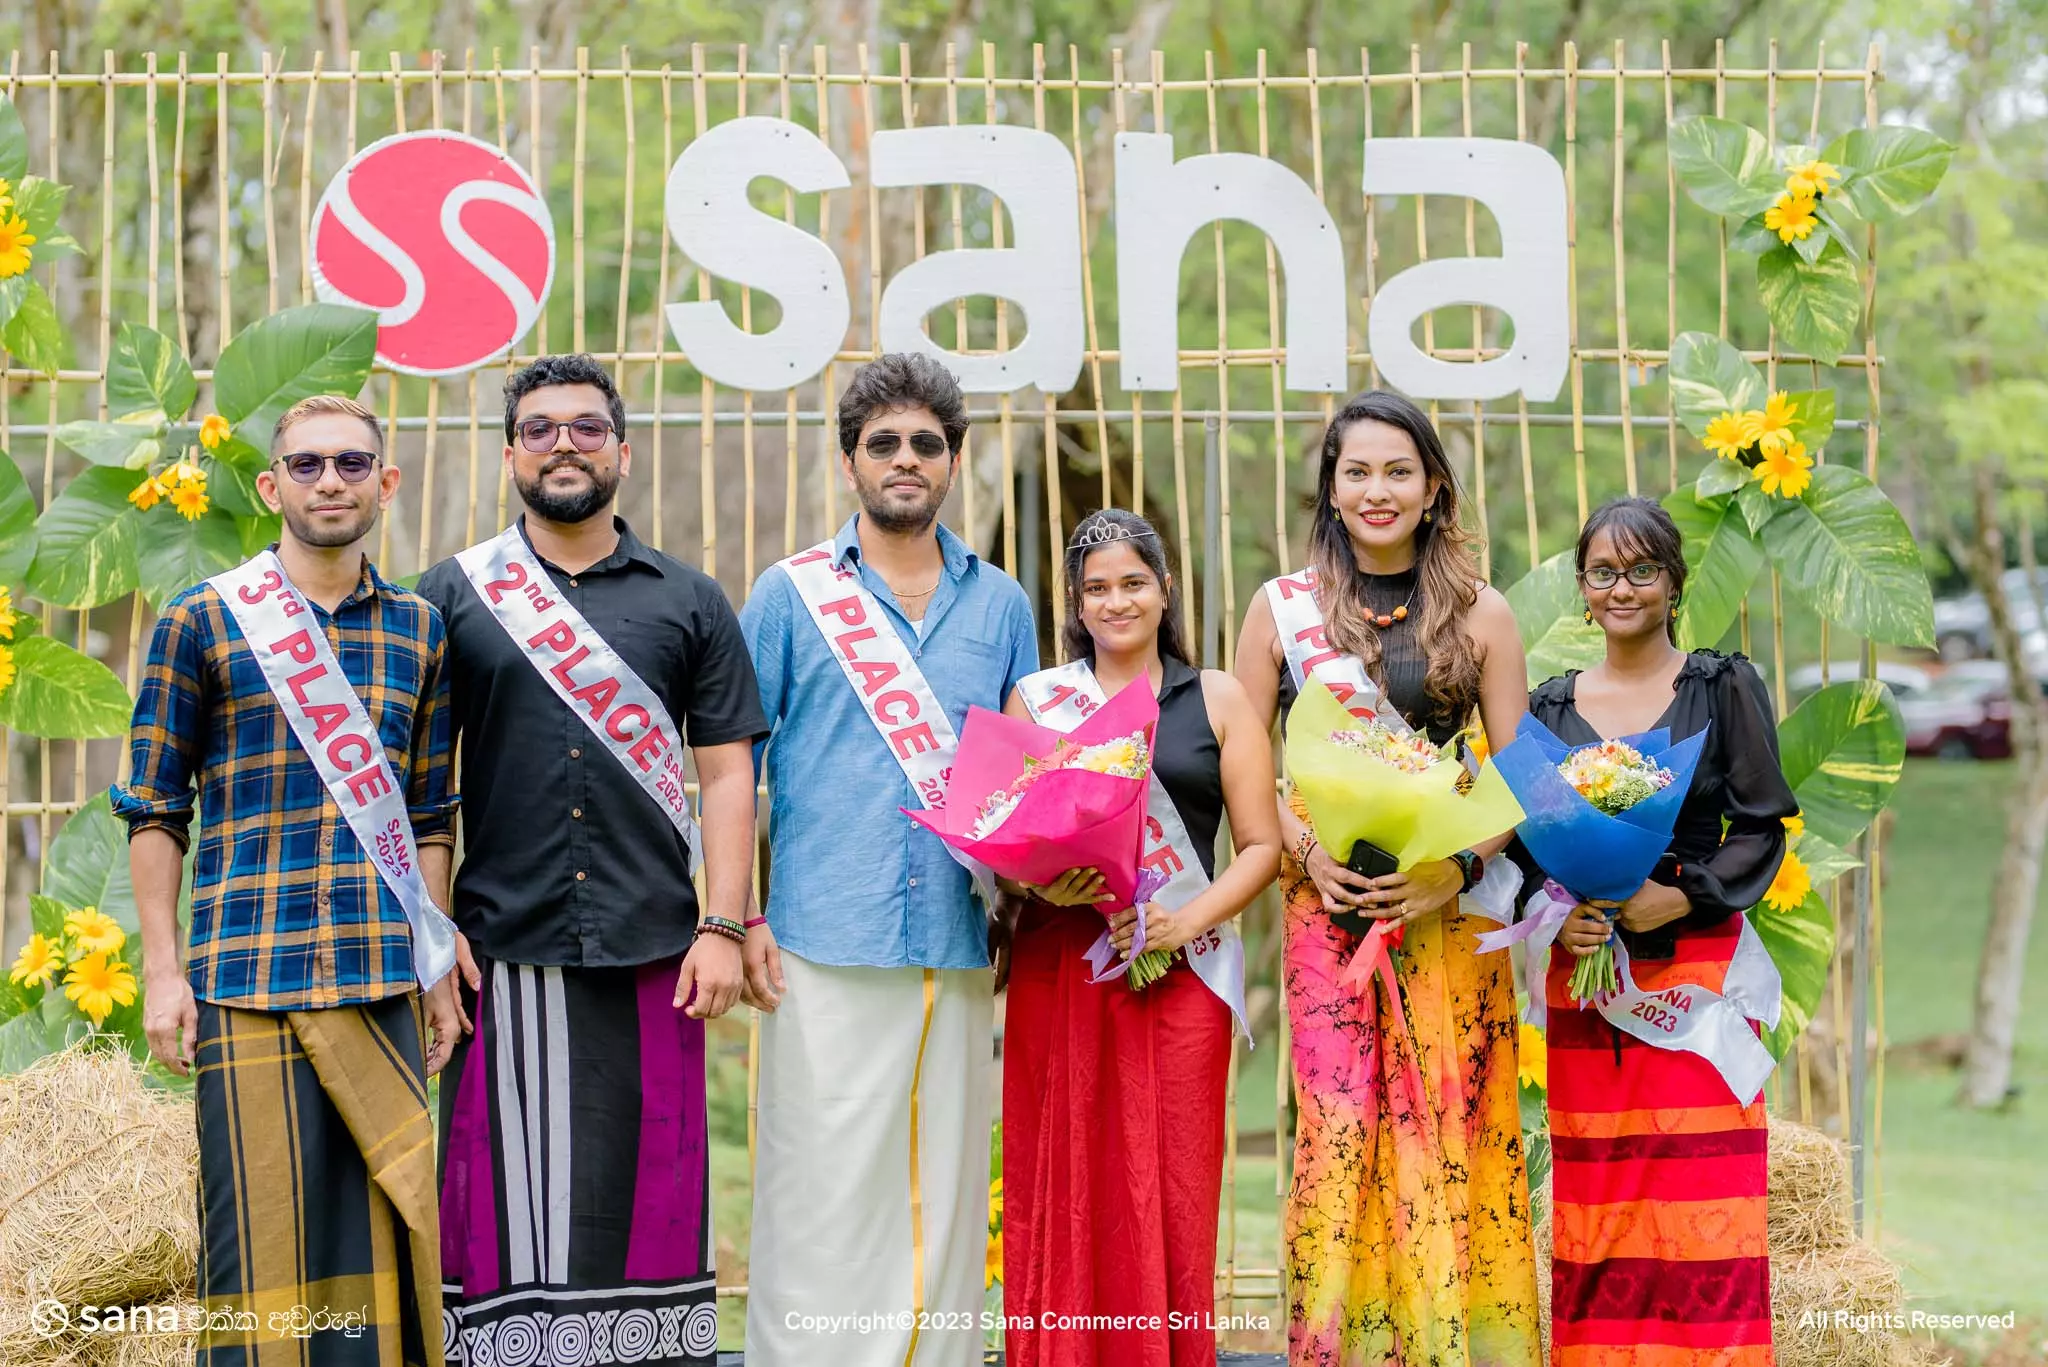 The spirit of togetherness and cultural vibrancy was brought to life at the Barn House Studio in Panadura on April 22nd as we organized the much-anticipated Sana Ekka Avurudu event